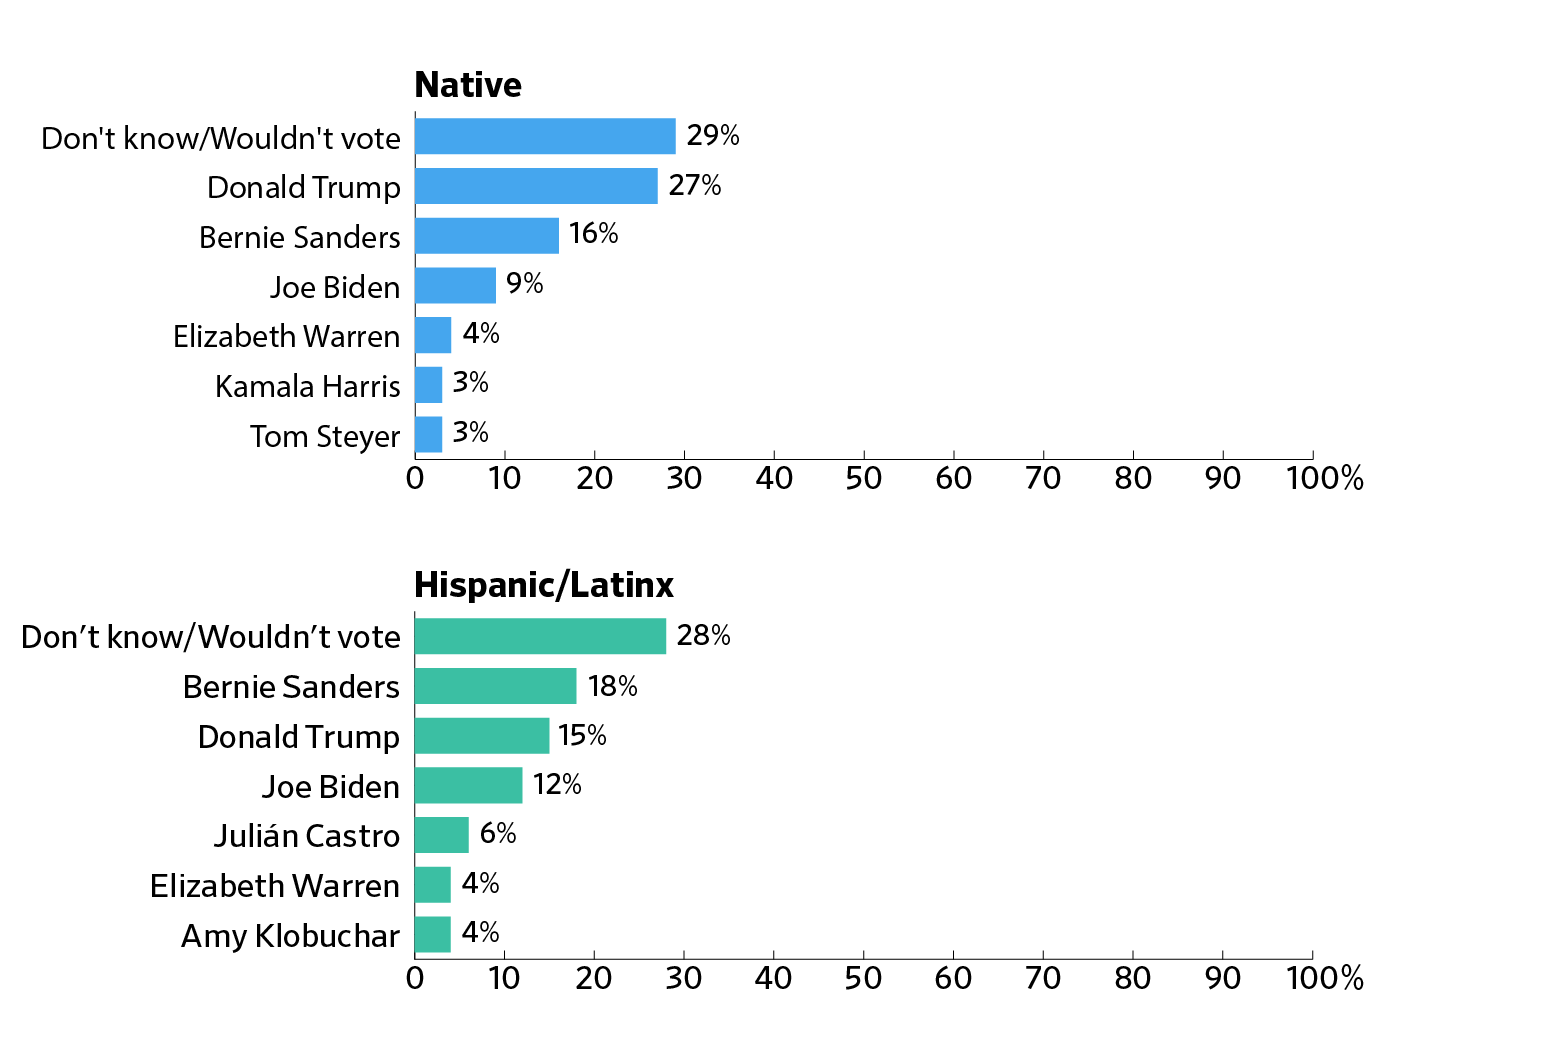 Bar charts showing who Native and Hispanic/Latinx respondents would vote for if an election was held today. "Don't know/Wouldn't vote" gets a plurality in both groups.